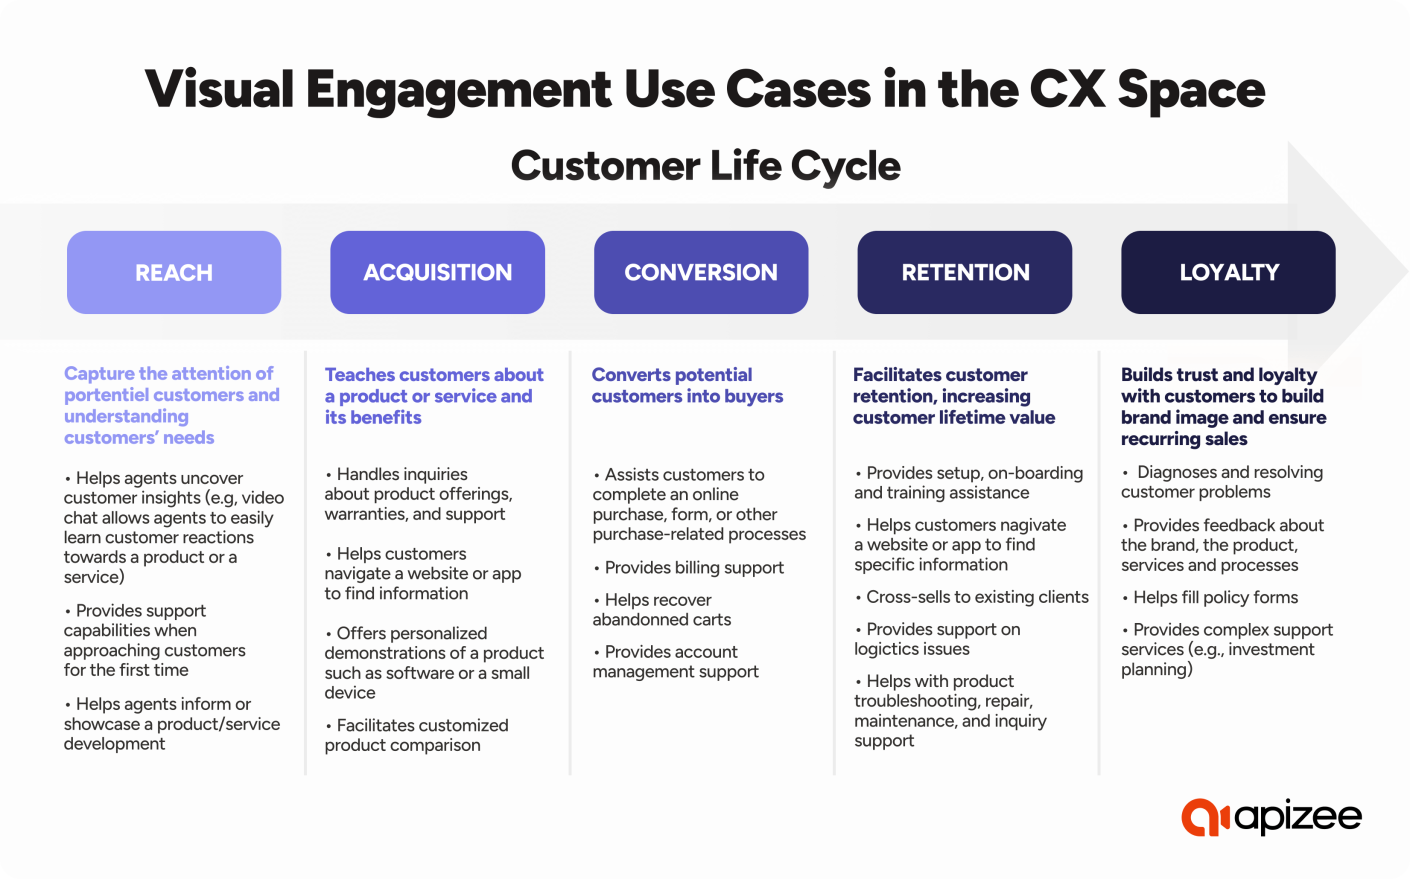 Visual Engagement Use Cases in the CX Space